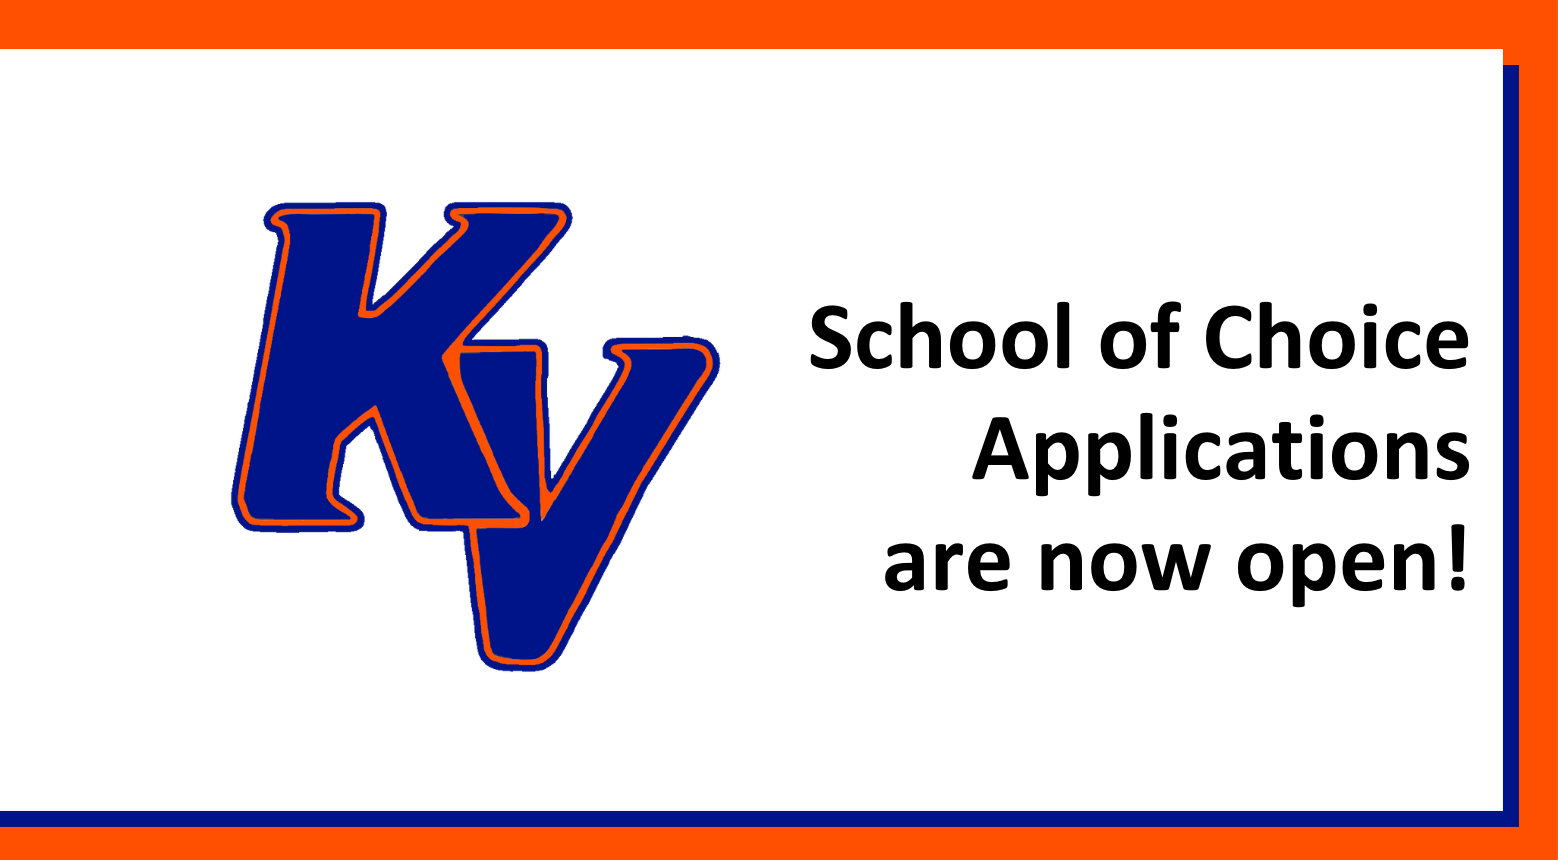 School of Choice applications are now open